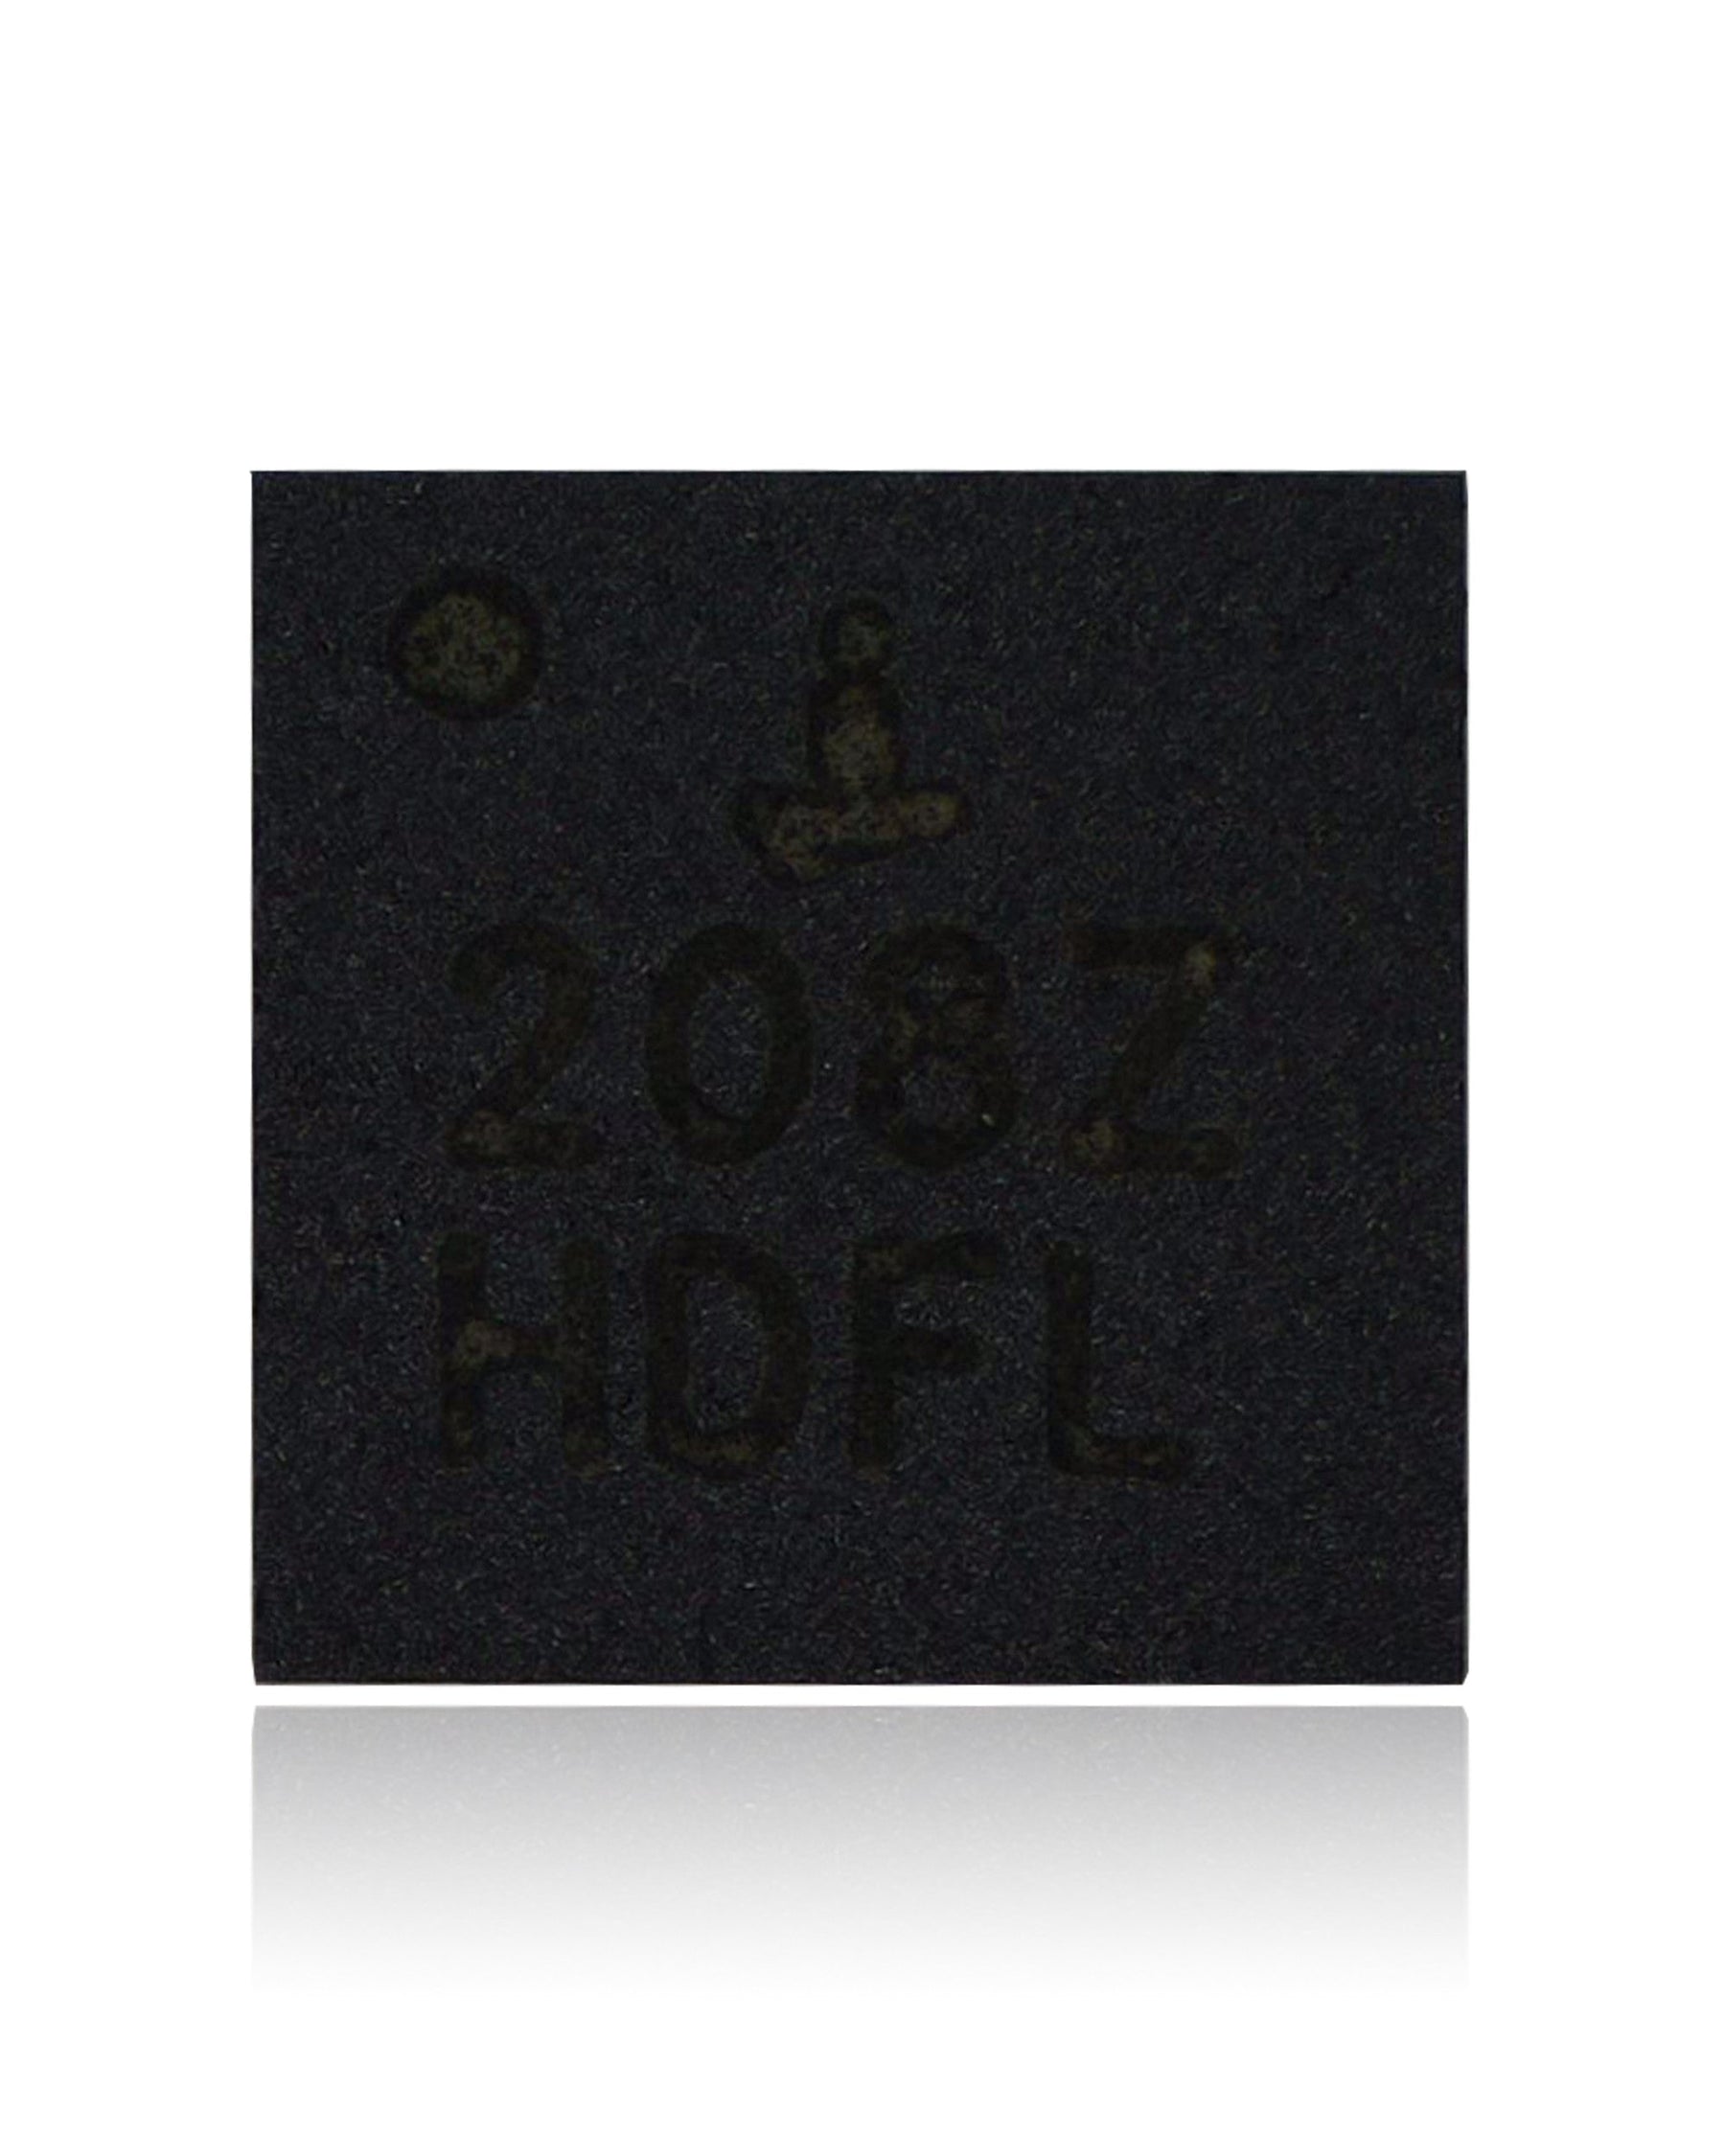 HIGH VOLTAGE SYNCHRONOUS RECTIFIED BUCK MOSFET CONTROLLER IC COMPATIBLE WITH MACBOOKS (INTERSIL: ISL6208CRZ / ISL208Z / 208Z: QFN-8 PIN)